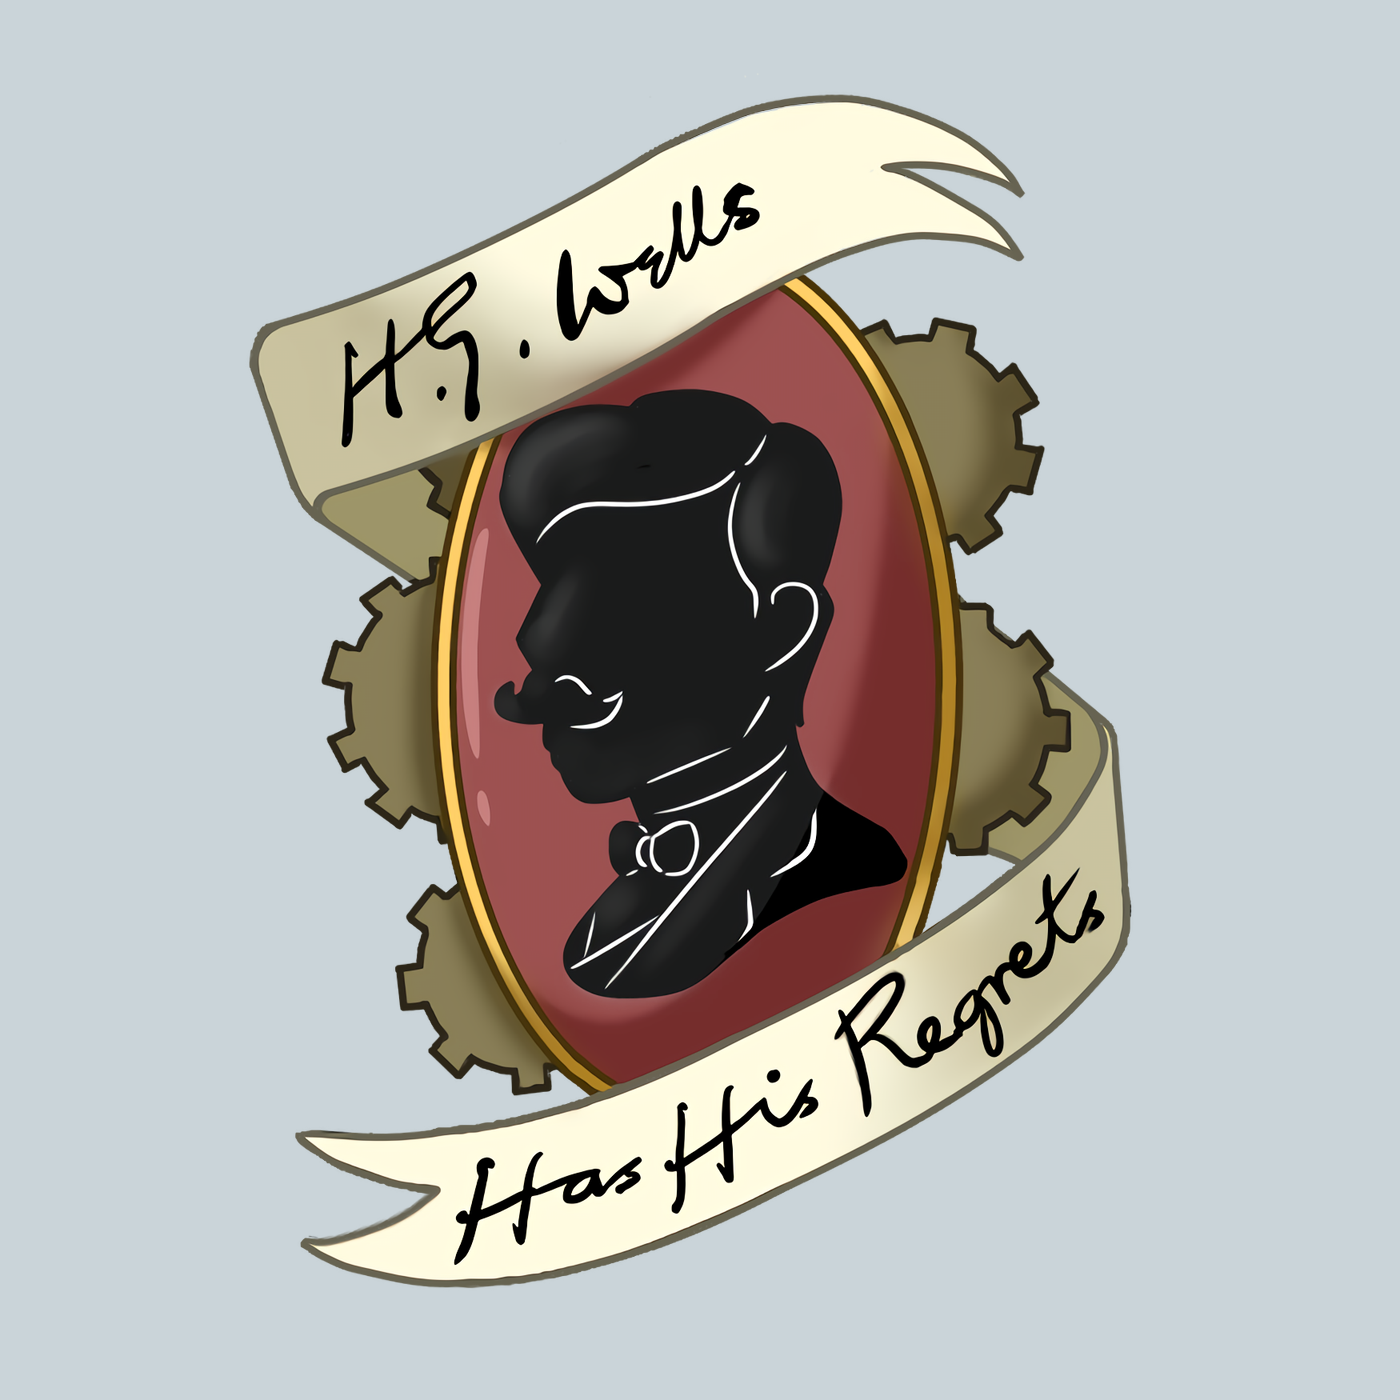 H.G. Wells Has His Regrets by Turpentine Productions